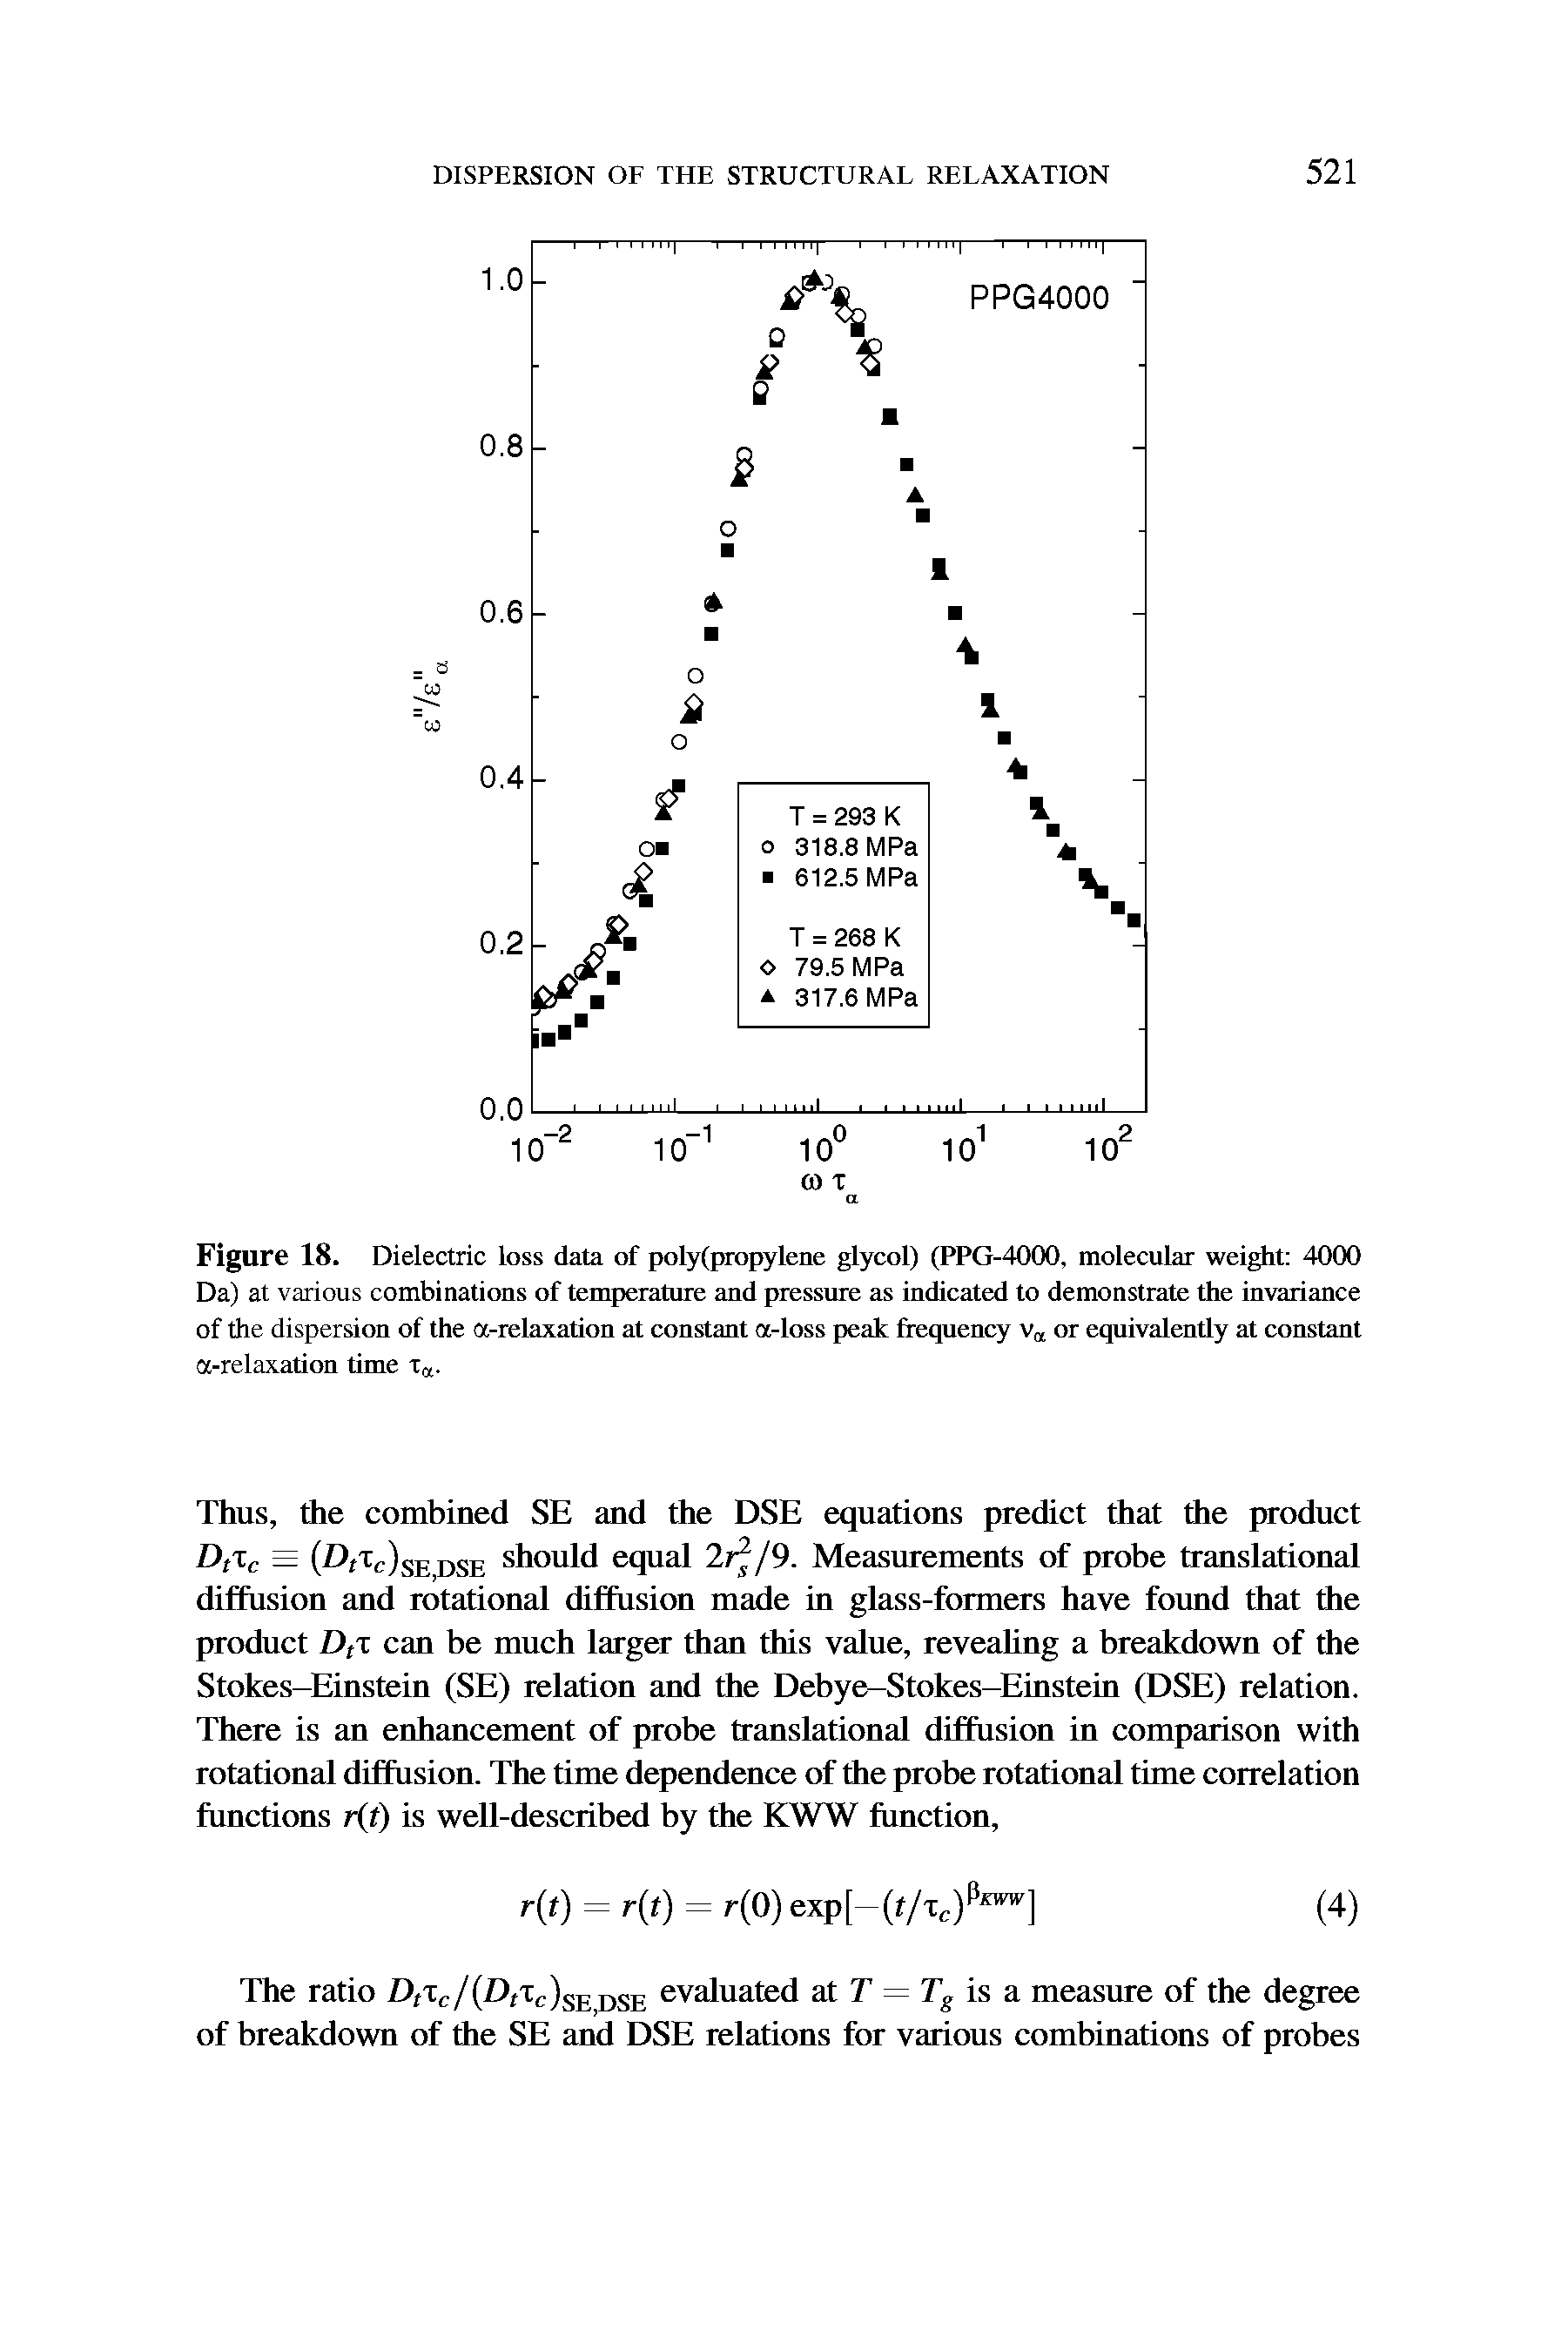 Figure 18. Dielectric loss data of poly(propylene glycol) (PPG-4000, molecular weight 4000 Da) at various combinations of temperature and pressure as indicated to demonstrate the invariance of the dispersion of the a-relaxation at constant a-loss peak frequency v or equivalently at constant a-relaxation time ra.